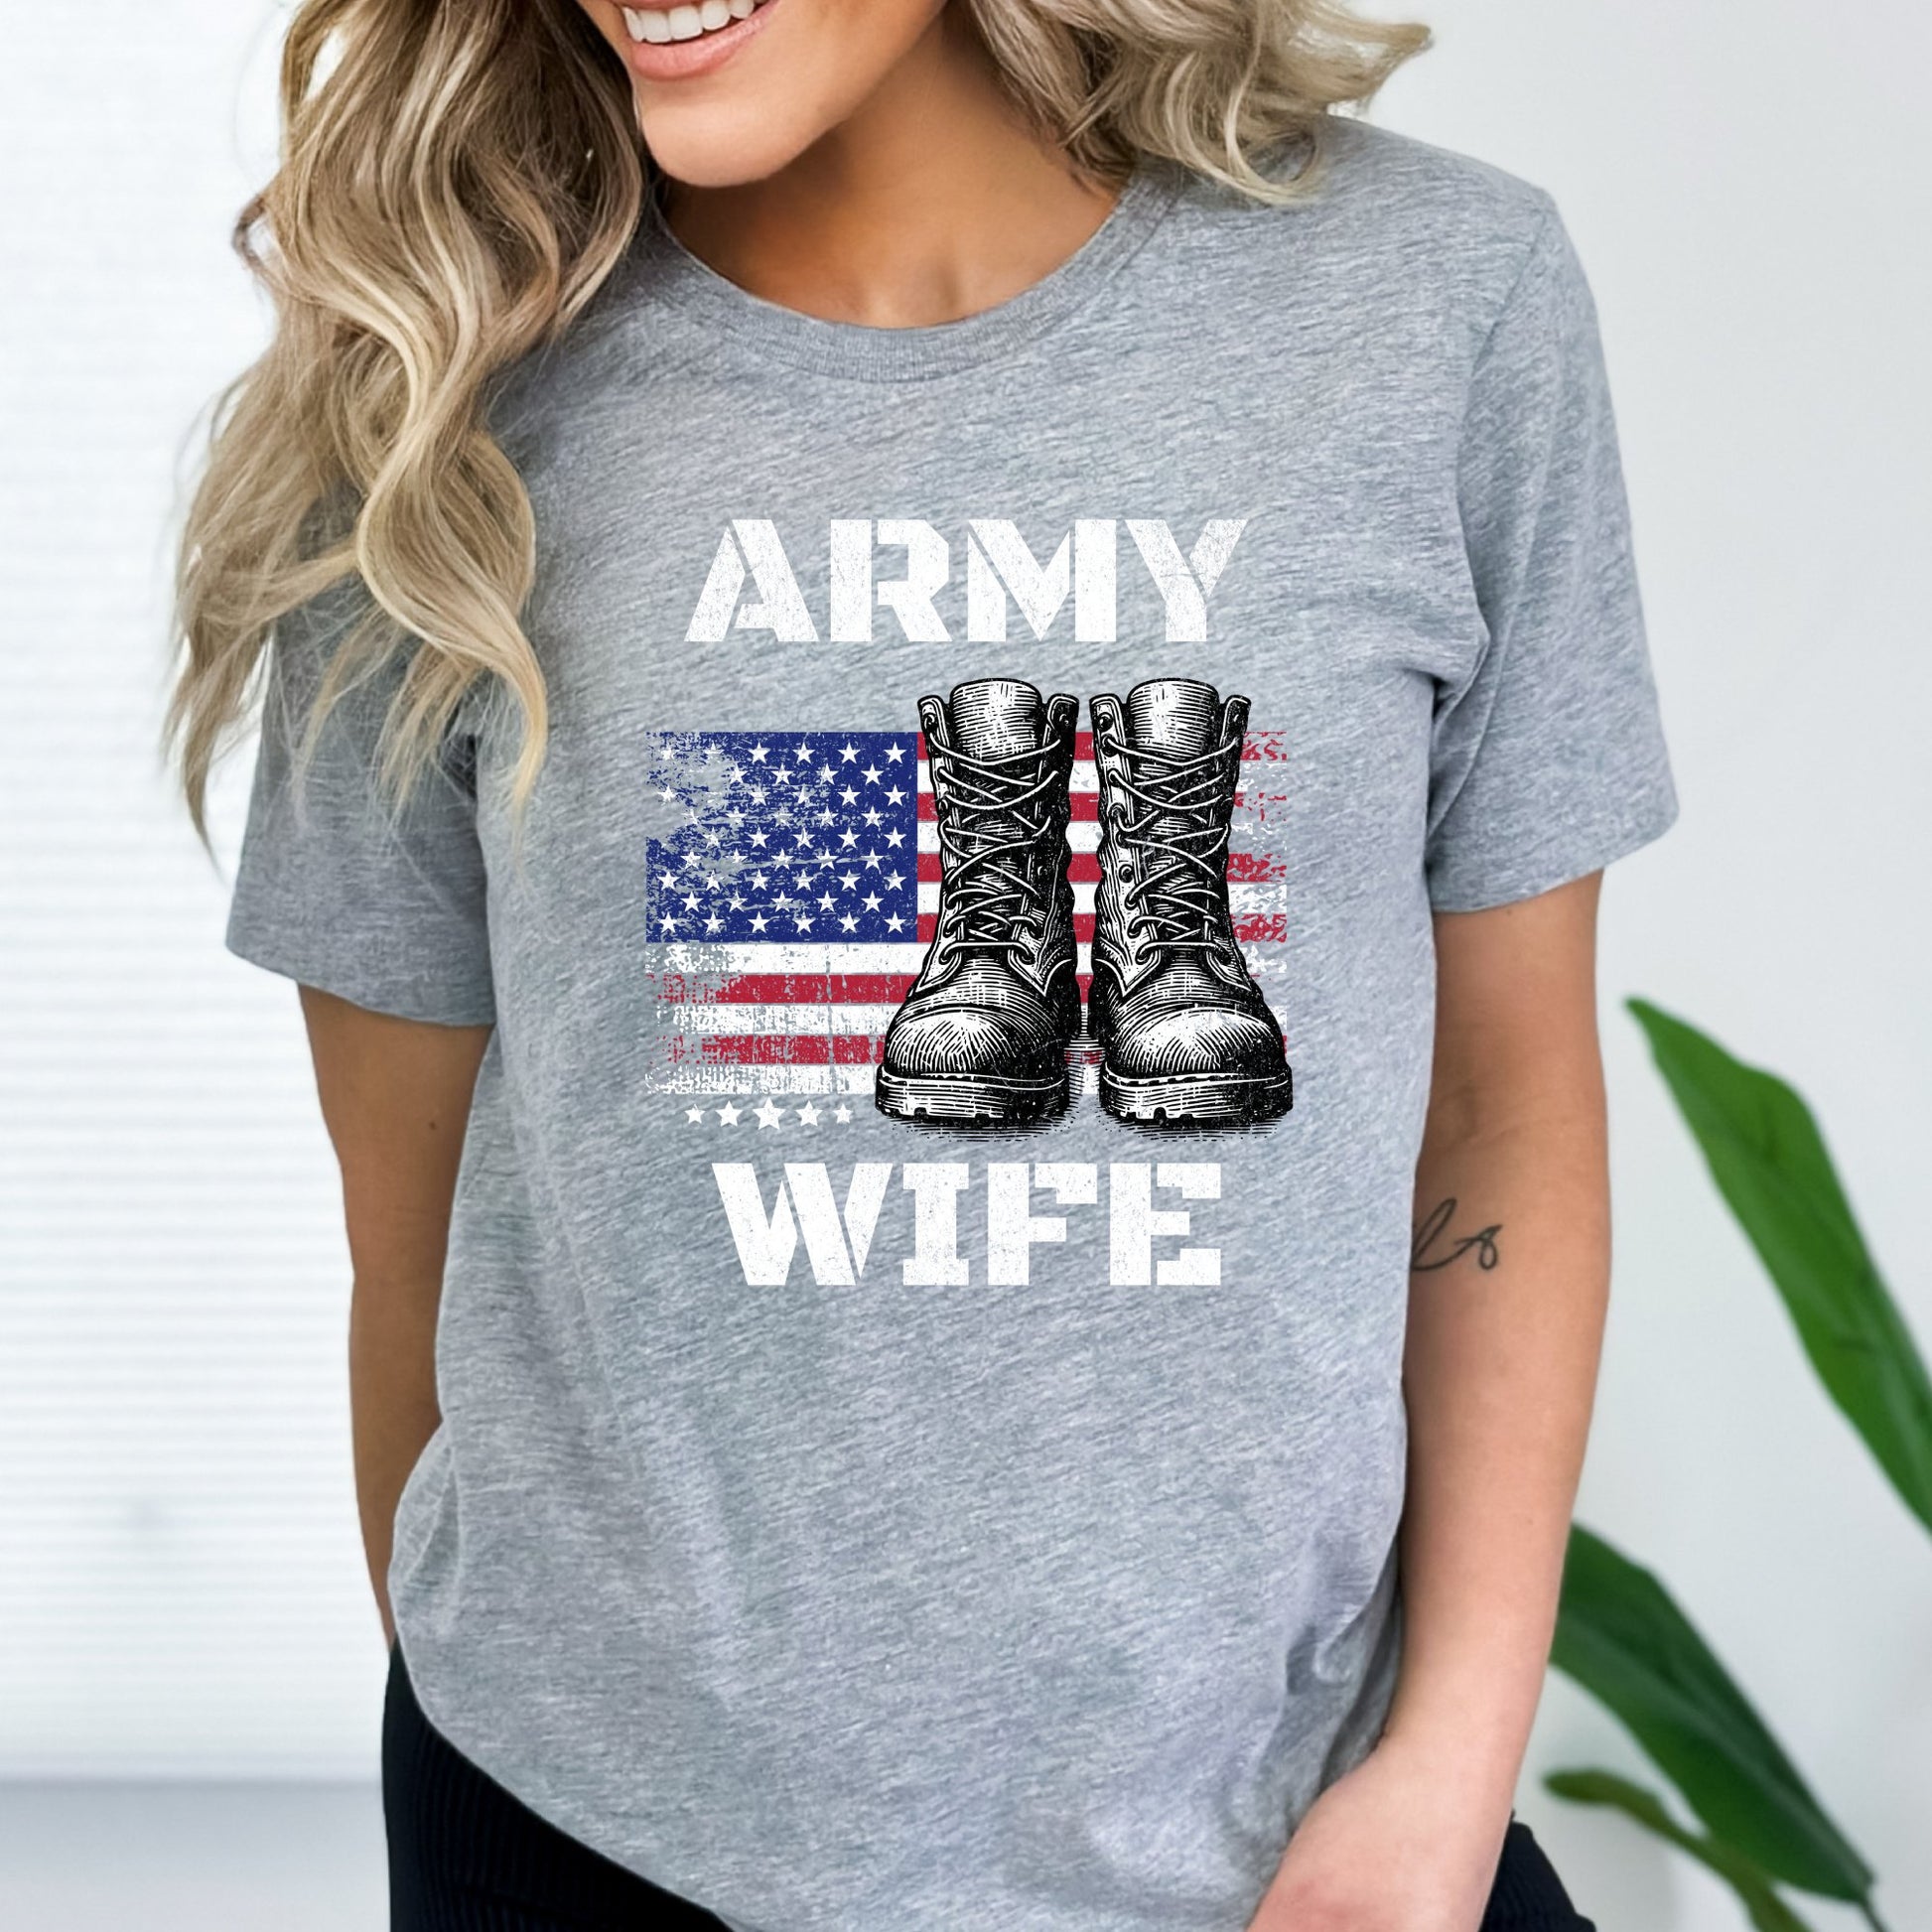 Army Wife Vintage American Flag and Boots T-Shirt, Patriotic Military Shirt - Mardonyx T-Shirt XS / Athletic Heather